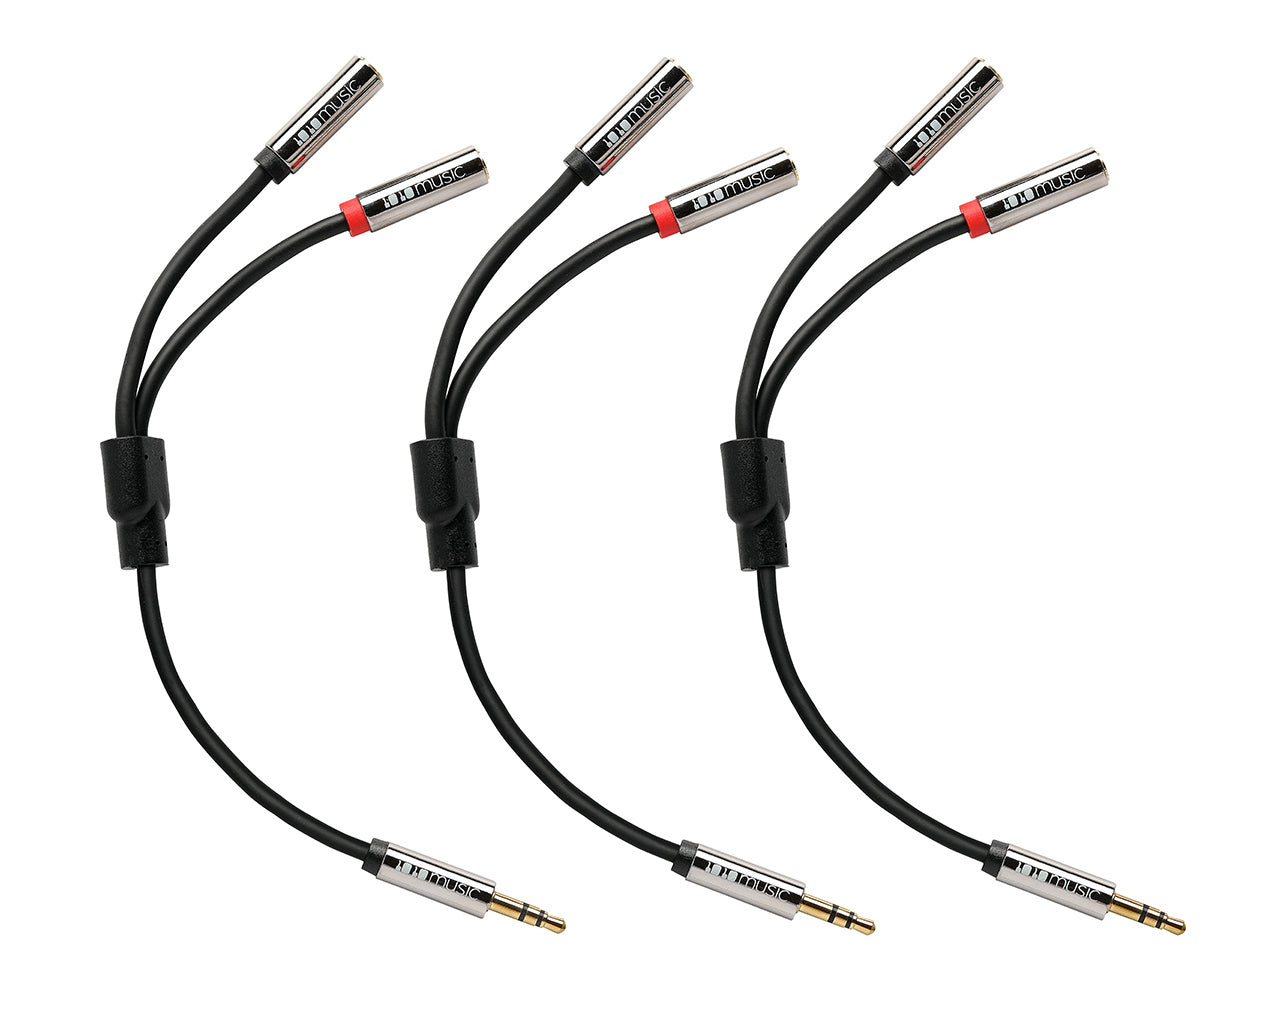 1010music 3.5mm Male to Female Stereo Breakout Cable (15cm, 3 Pack)